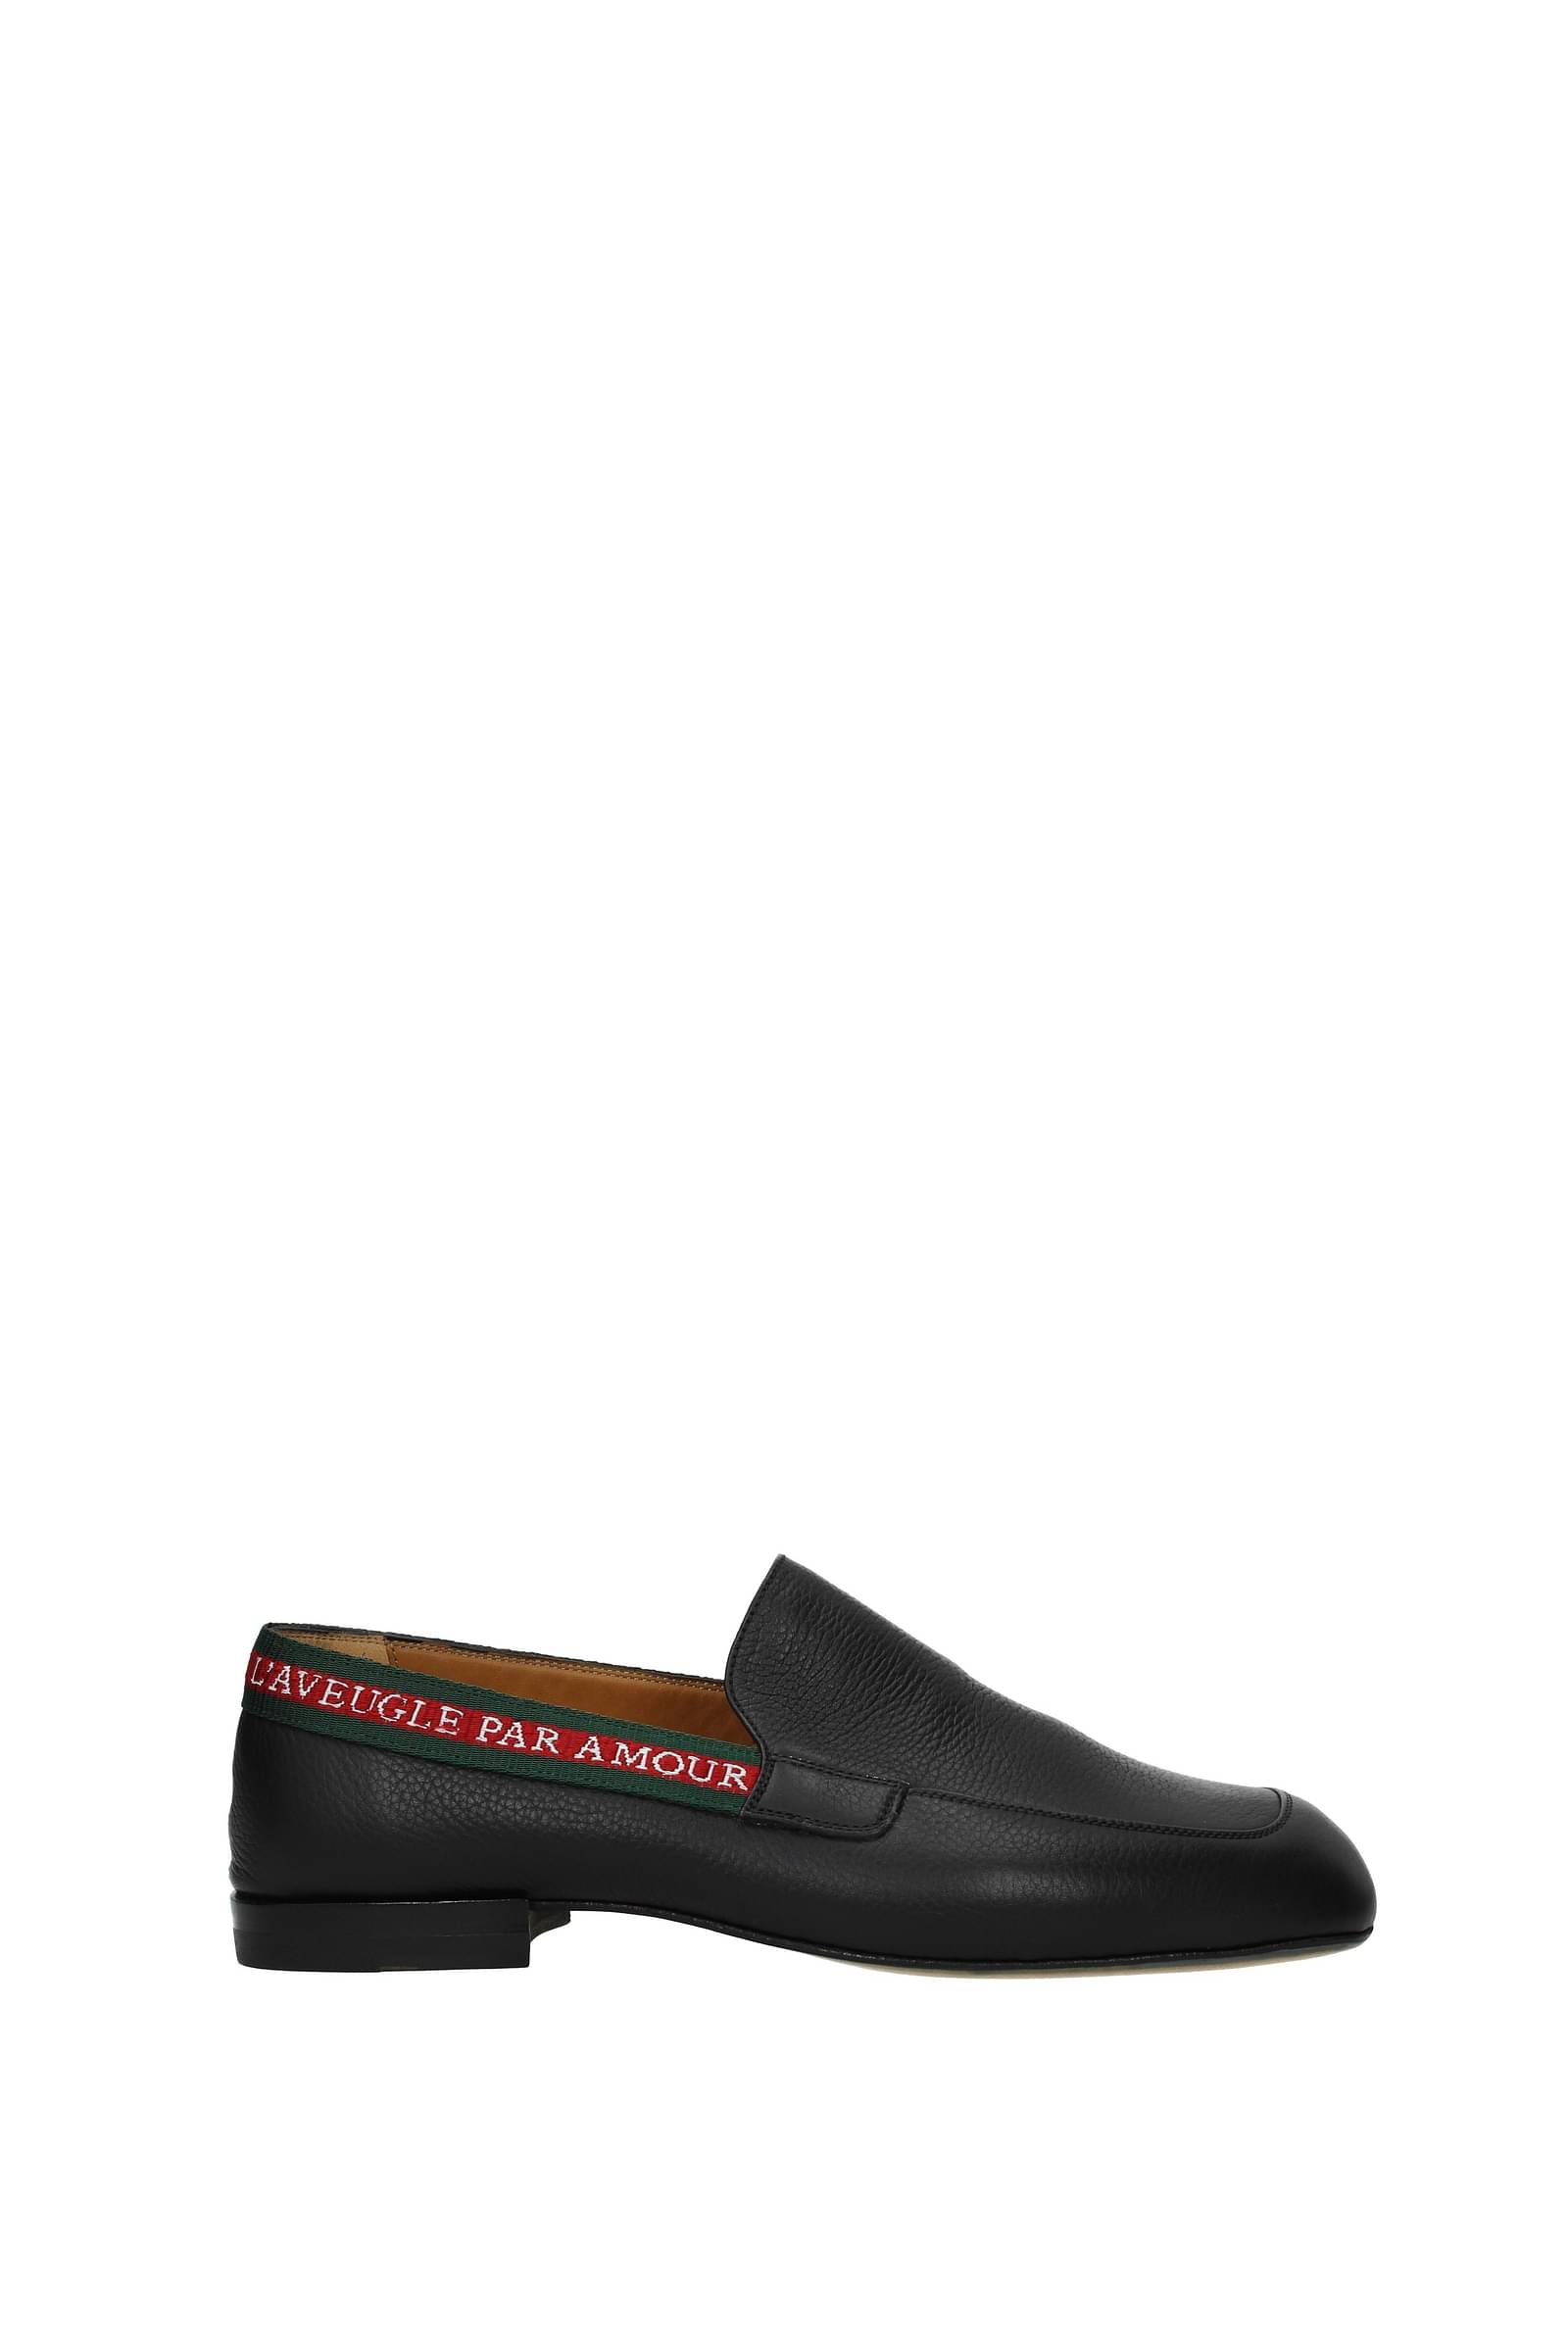 Gucci loafers sales: super offers for you!